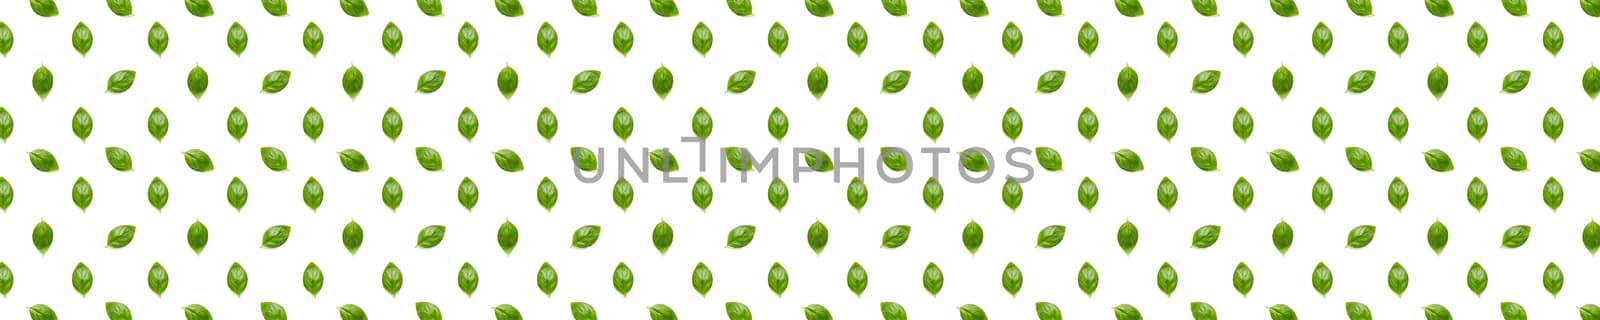 Basil banner. Green leaves of fresh italian basil background on whte backdrop. Basil leaves isolated on white background. flat lay by PhotoTime